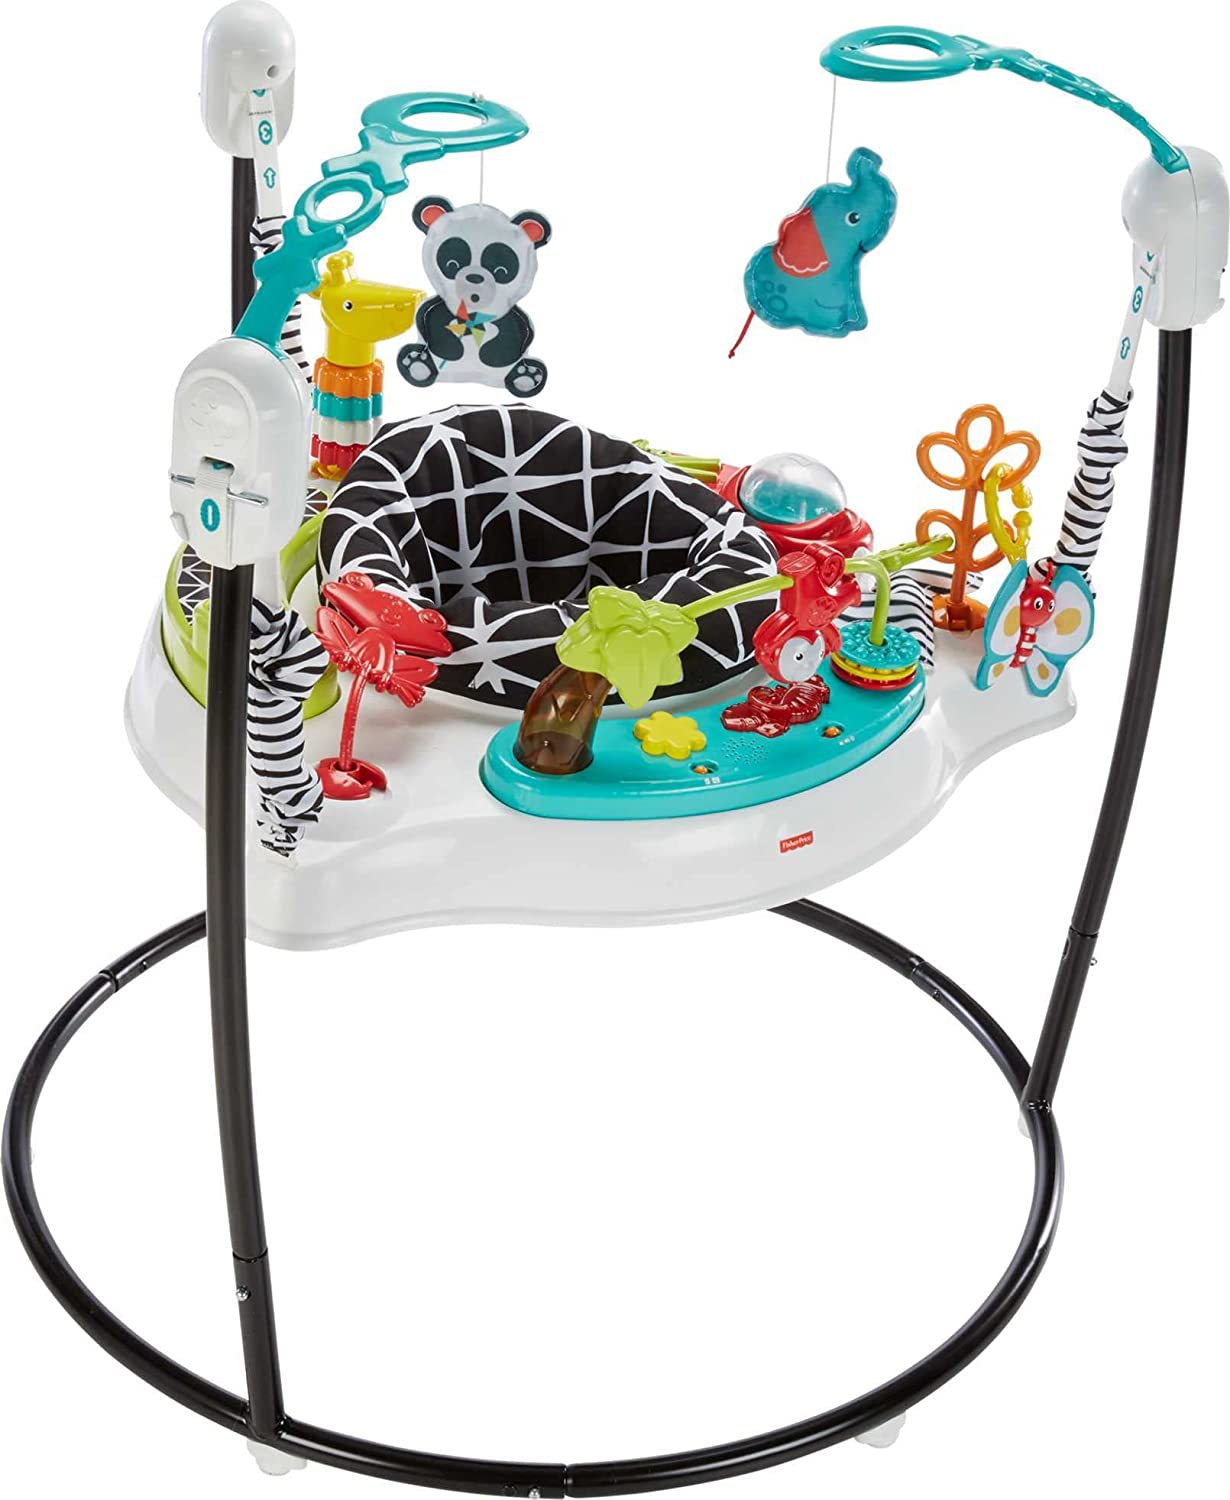 Fisher-Price Animal Wonders Jumperoo, White - with 360 Degrees Of Play For Baby To Discover